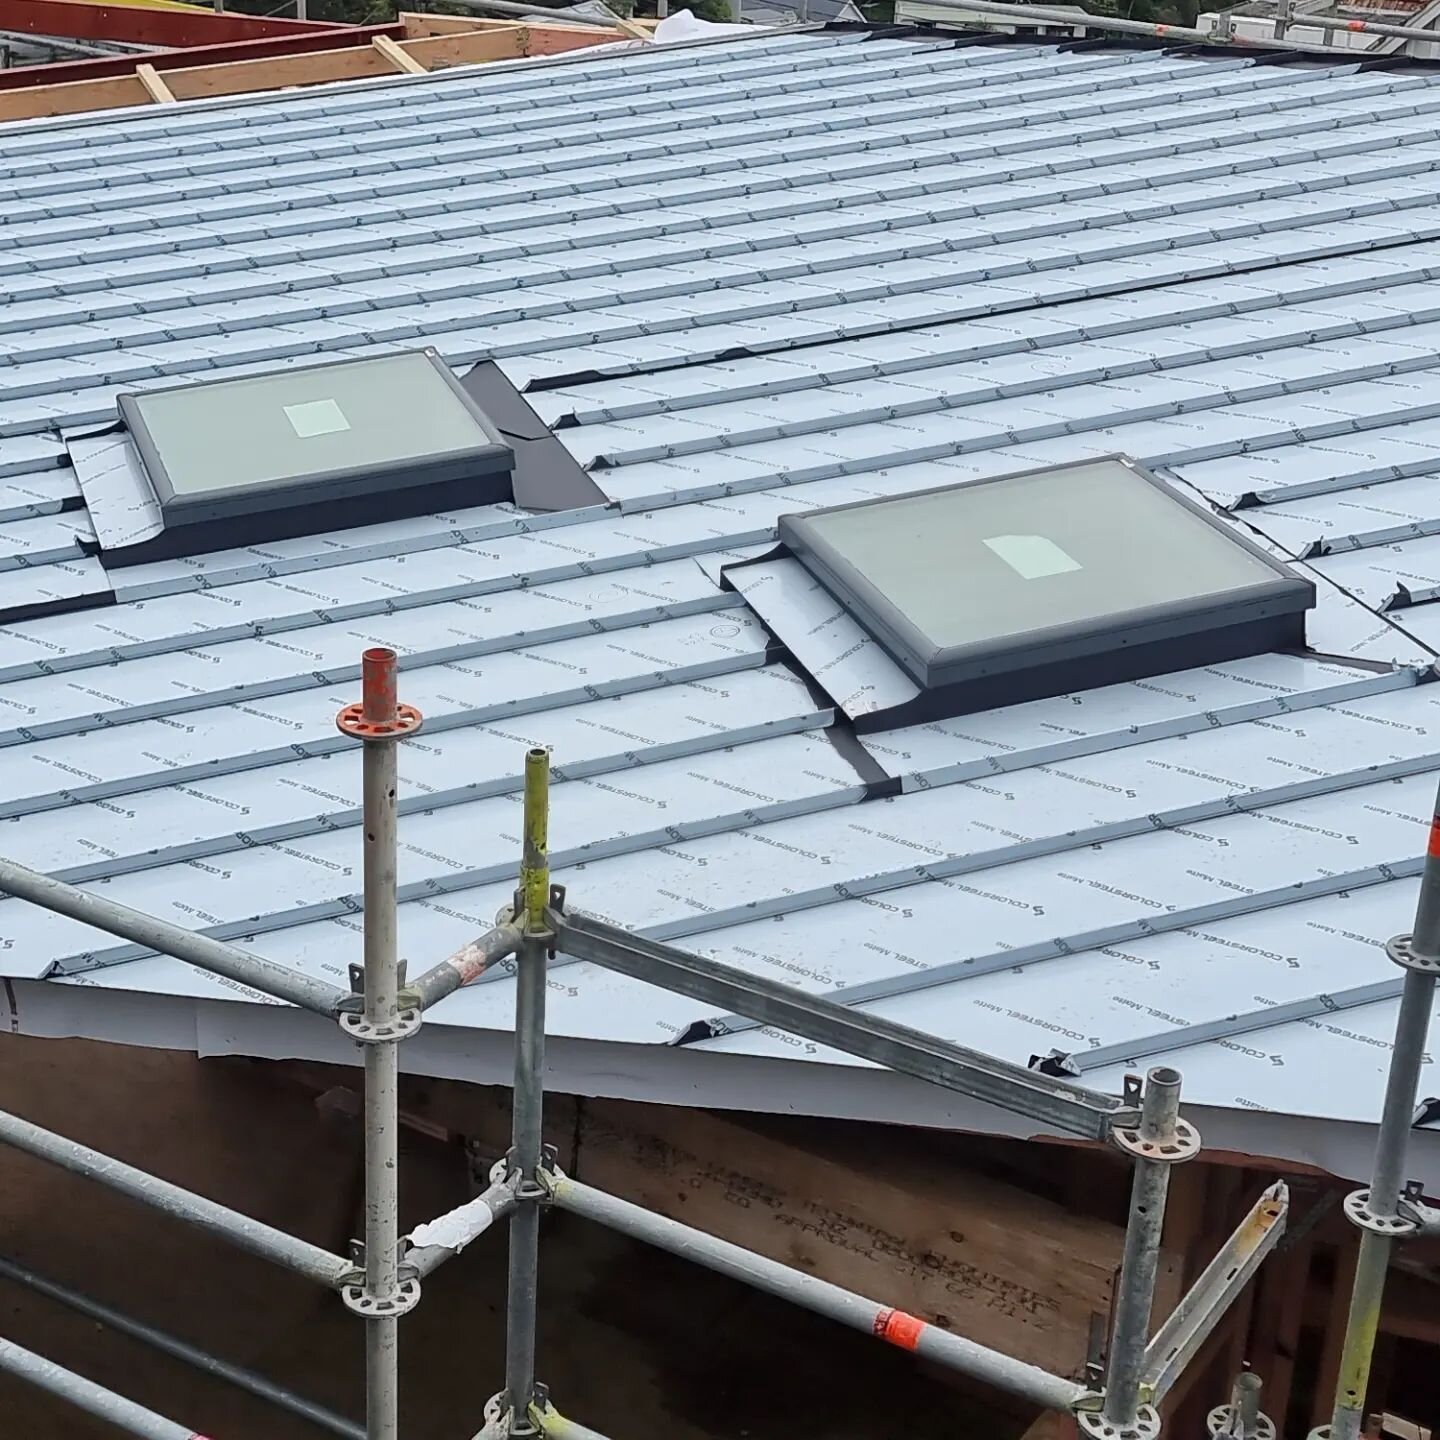 Good Progress on the kelburn project this week. Thank goodness for the sun this week! Thanks to the team at roofing industries wellington for the smooth supply
#Standingseam #standingseamspecialist #spanlok370 #flaxpodmatte #roofingindustries #spanlo